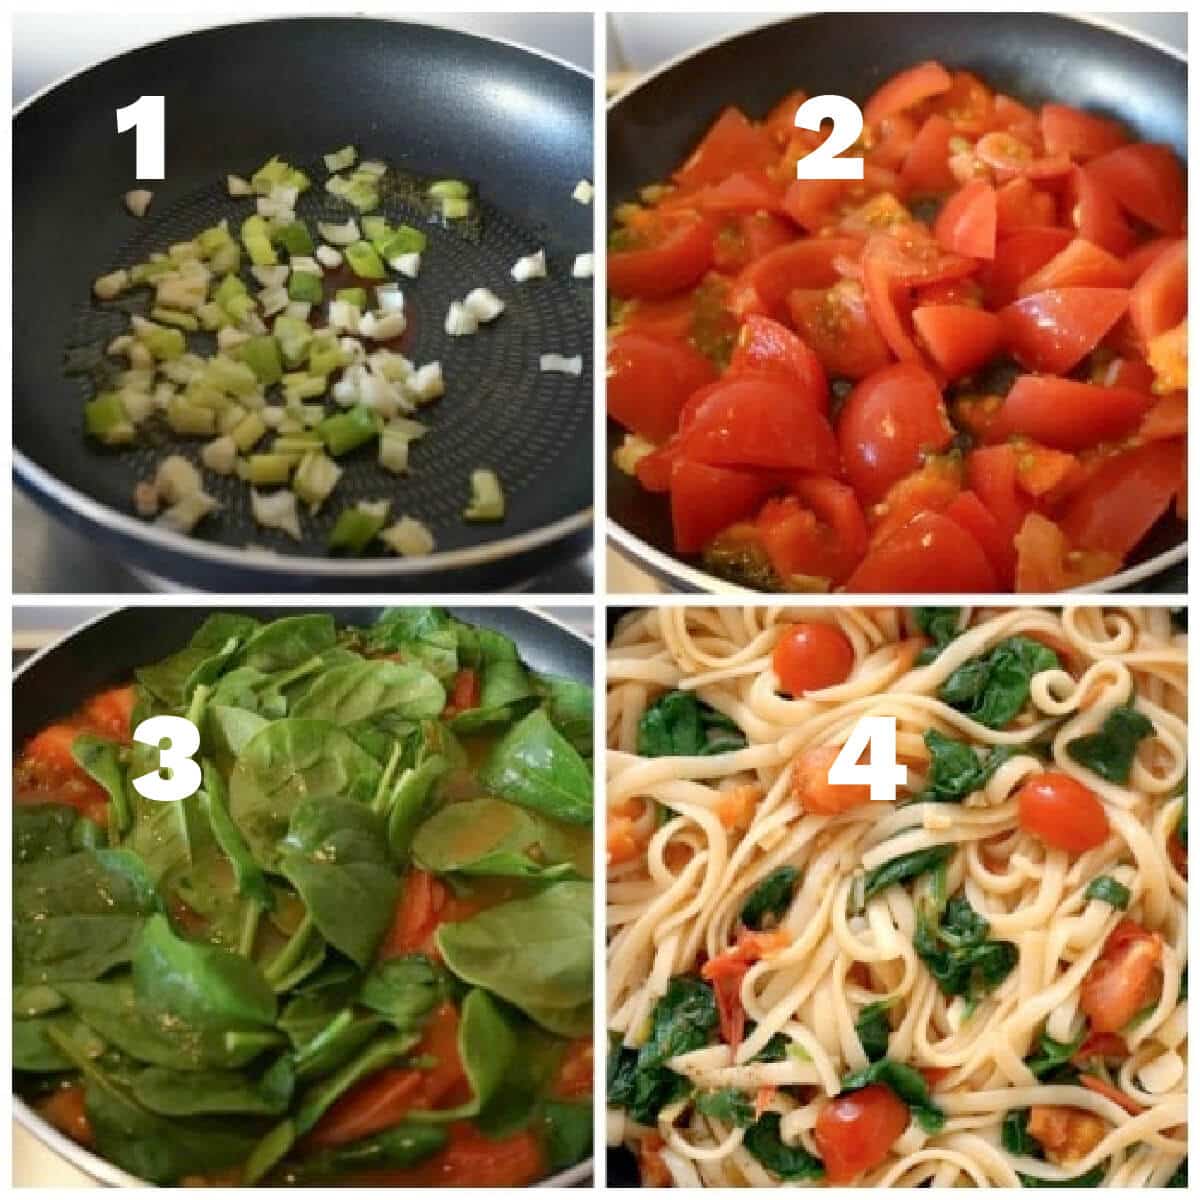 Collage of 4 photos to show how to make spinach and tomato pasta.